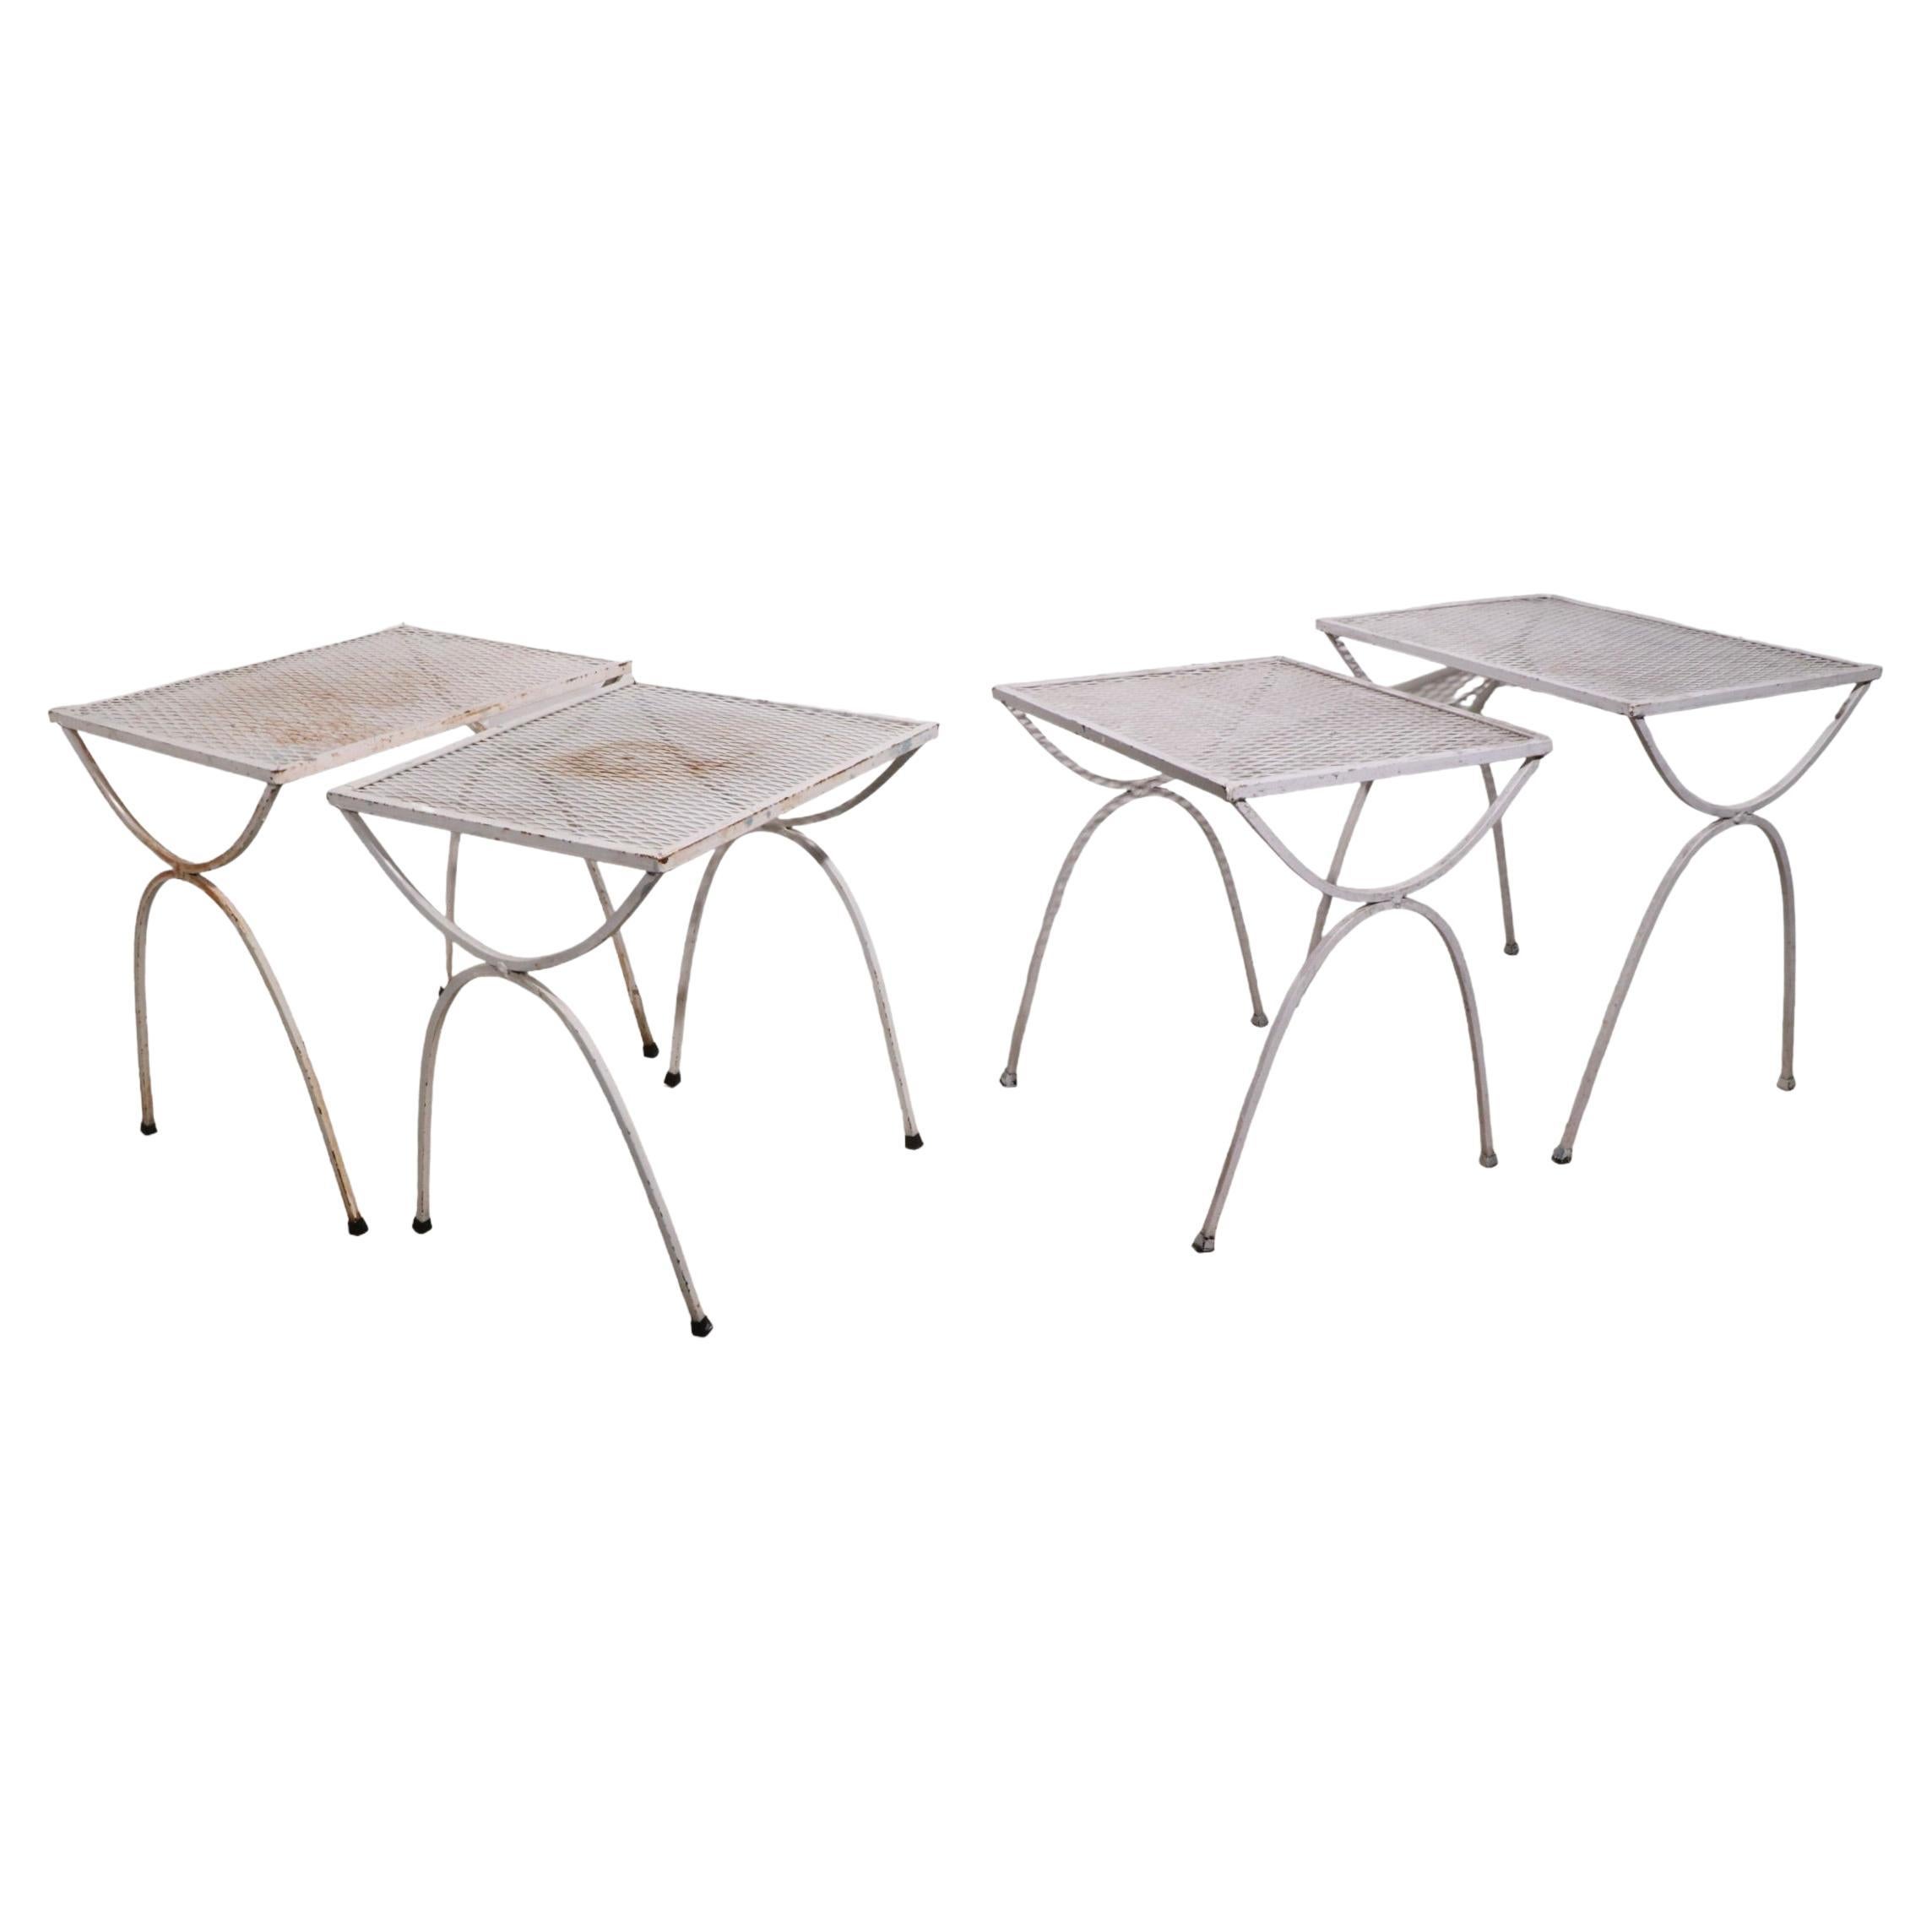 Two Piece Garden Patio Poolside Nesting Tables by Salterini 2 Sets Available For Sale